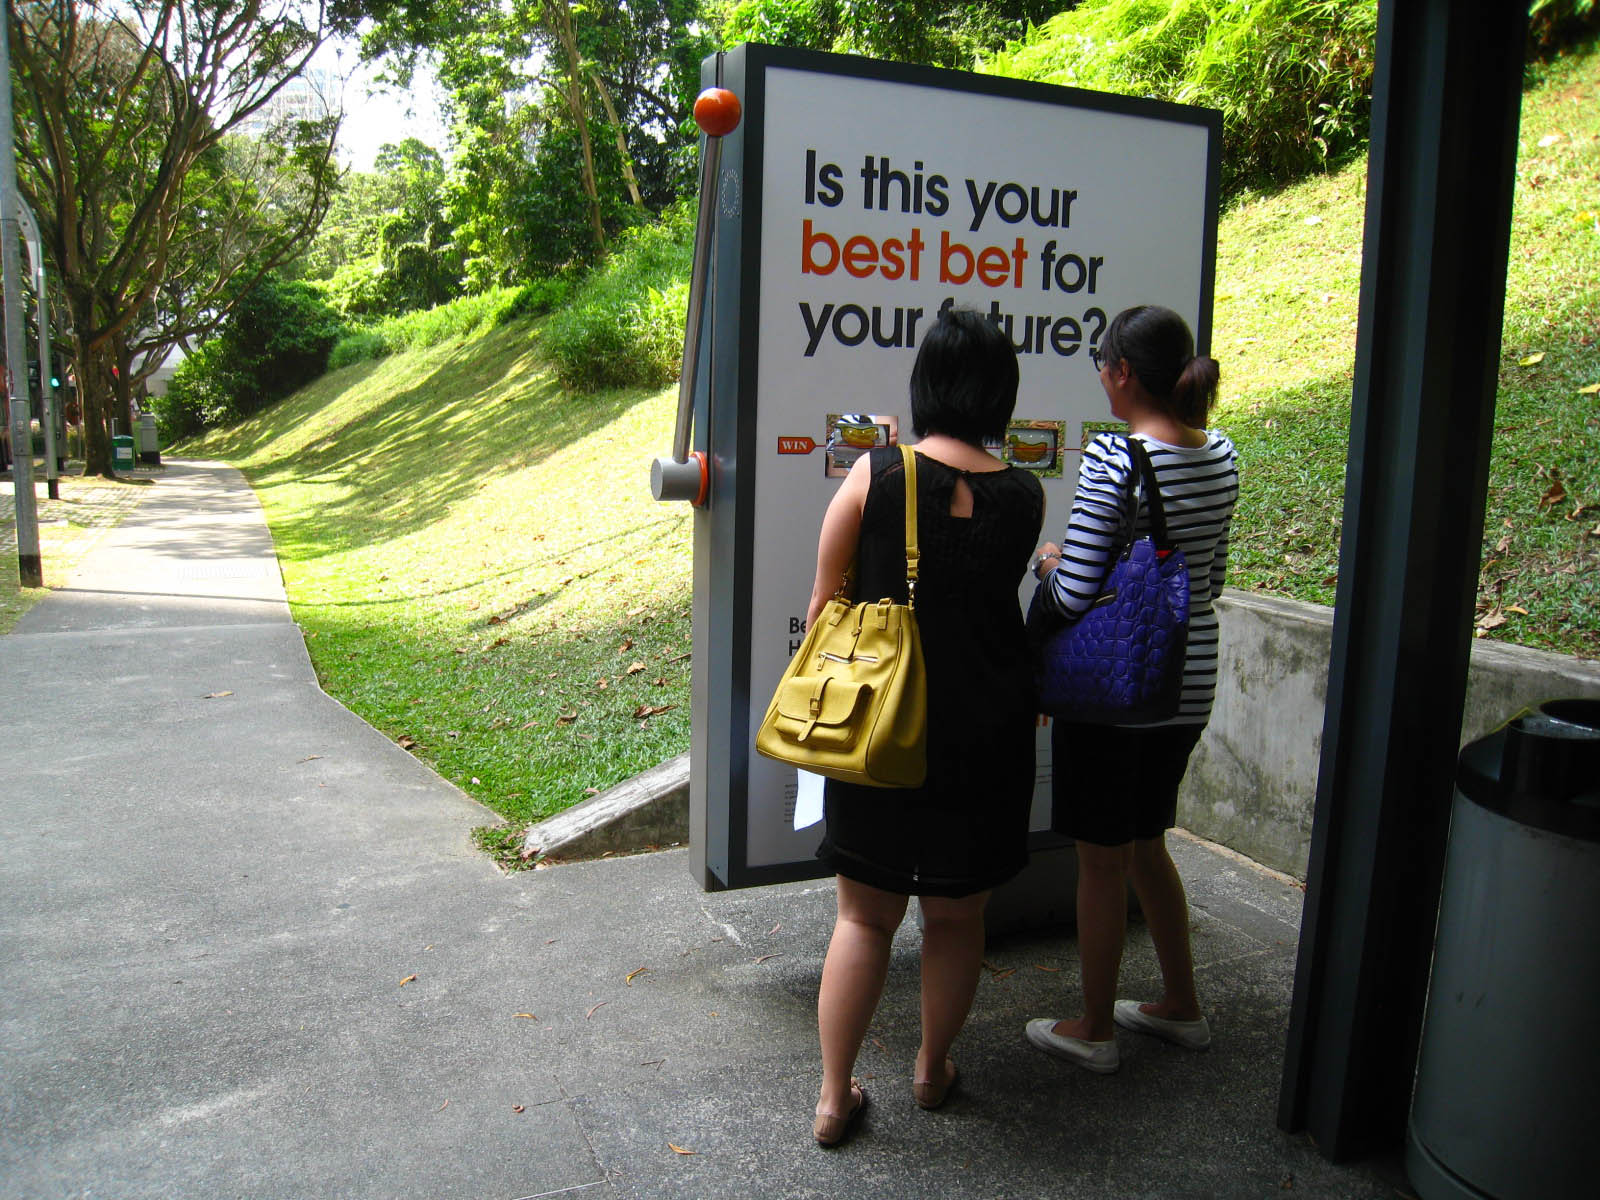  ... ADVERTISING | Advertising Blog & Community » NTUC Income: Jackpot